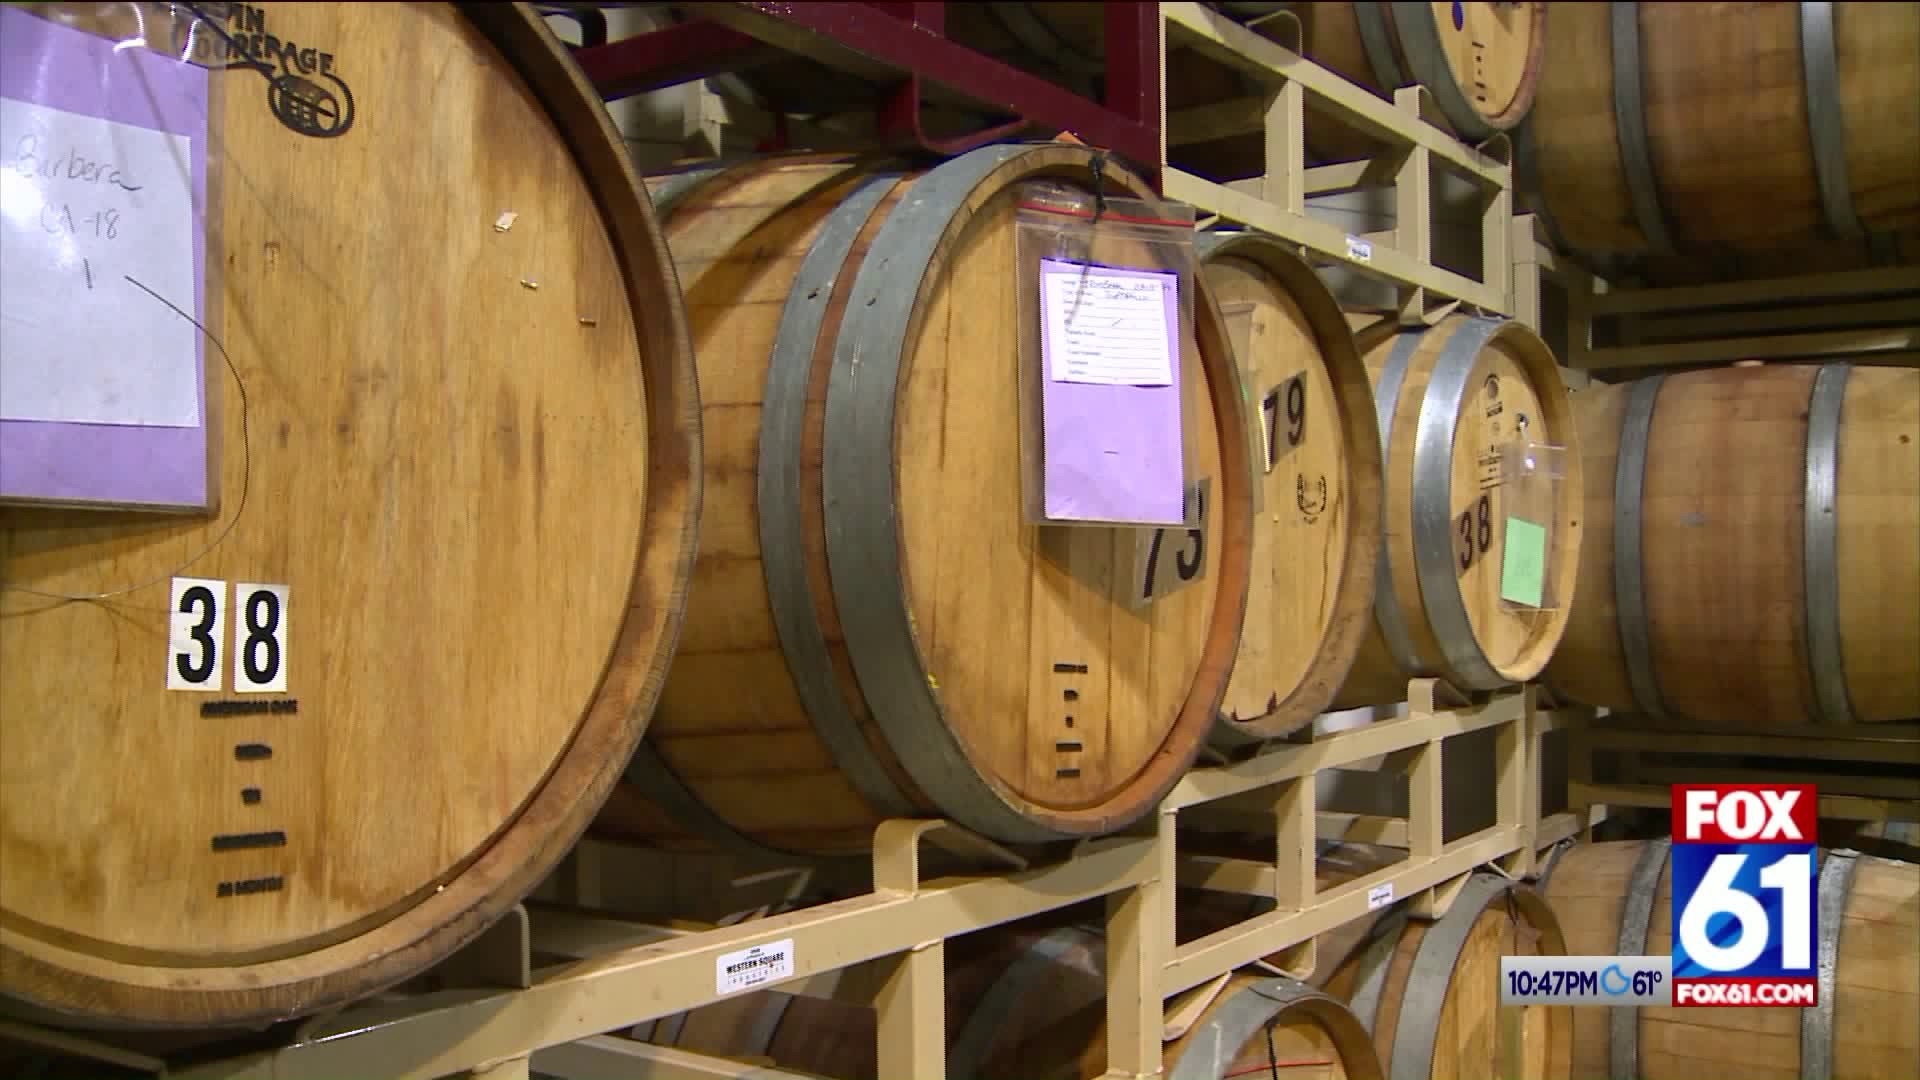 Daytrippers: The Wine Press